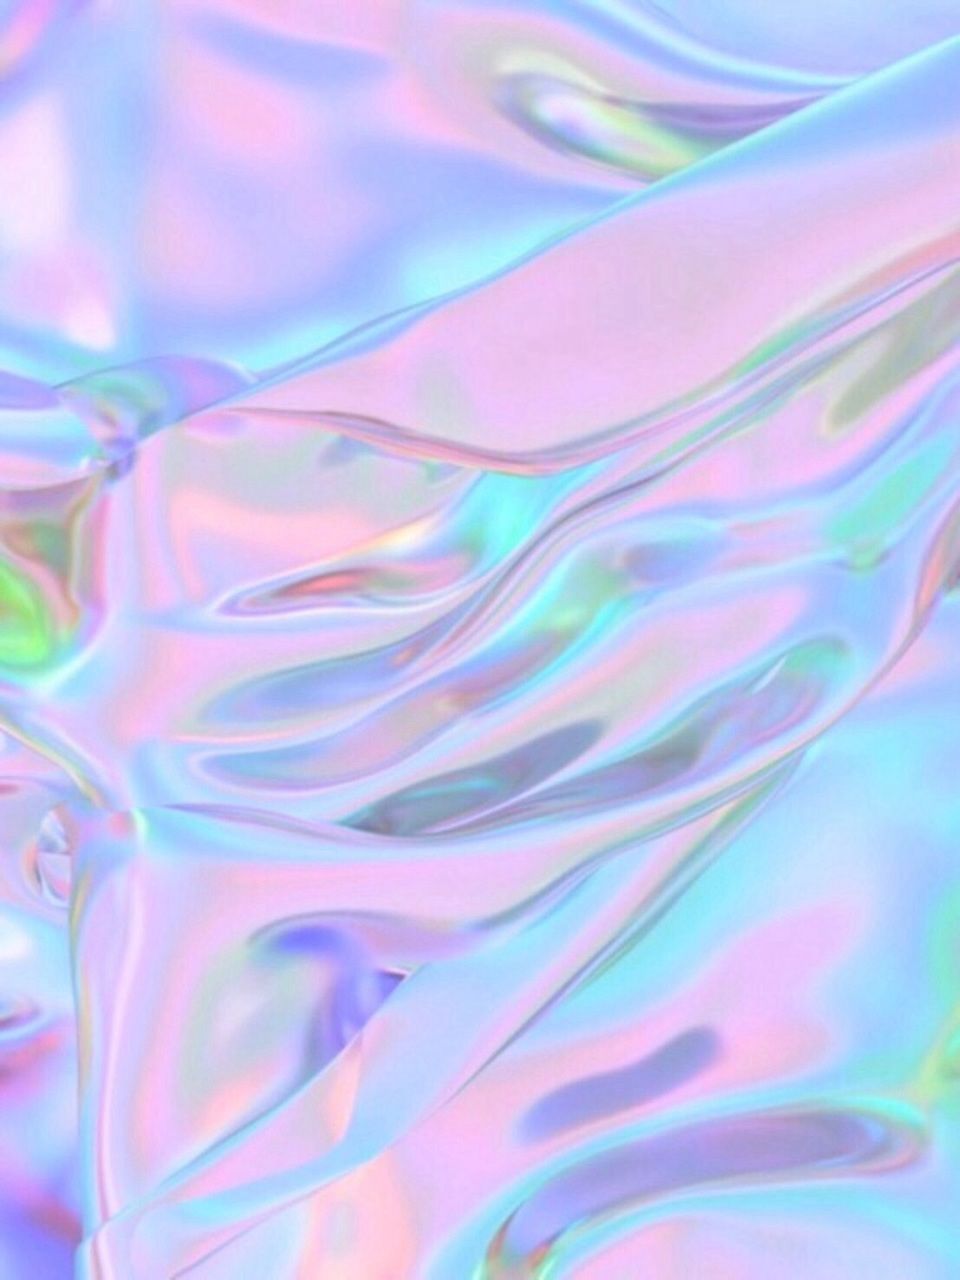 A close up of a piece of iridescent plastic with a wave pattern - Iridescent